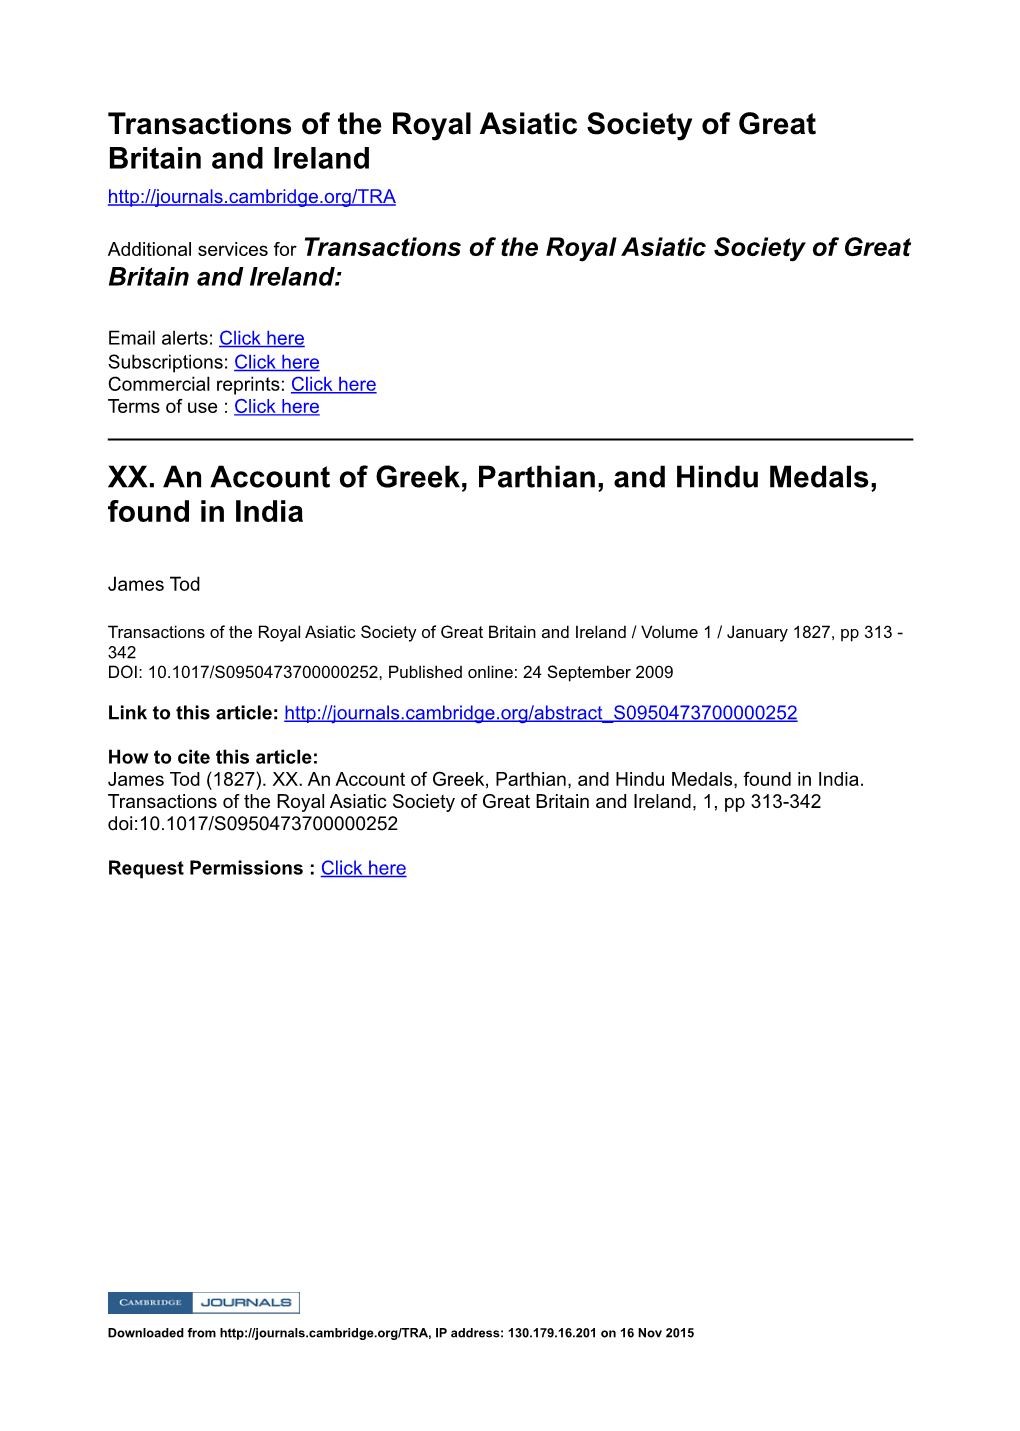 Transactions of the Royal Asiatic Society of Great Britain and Ireland